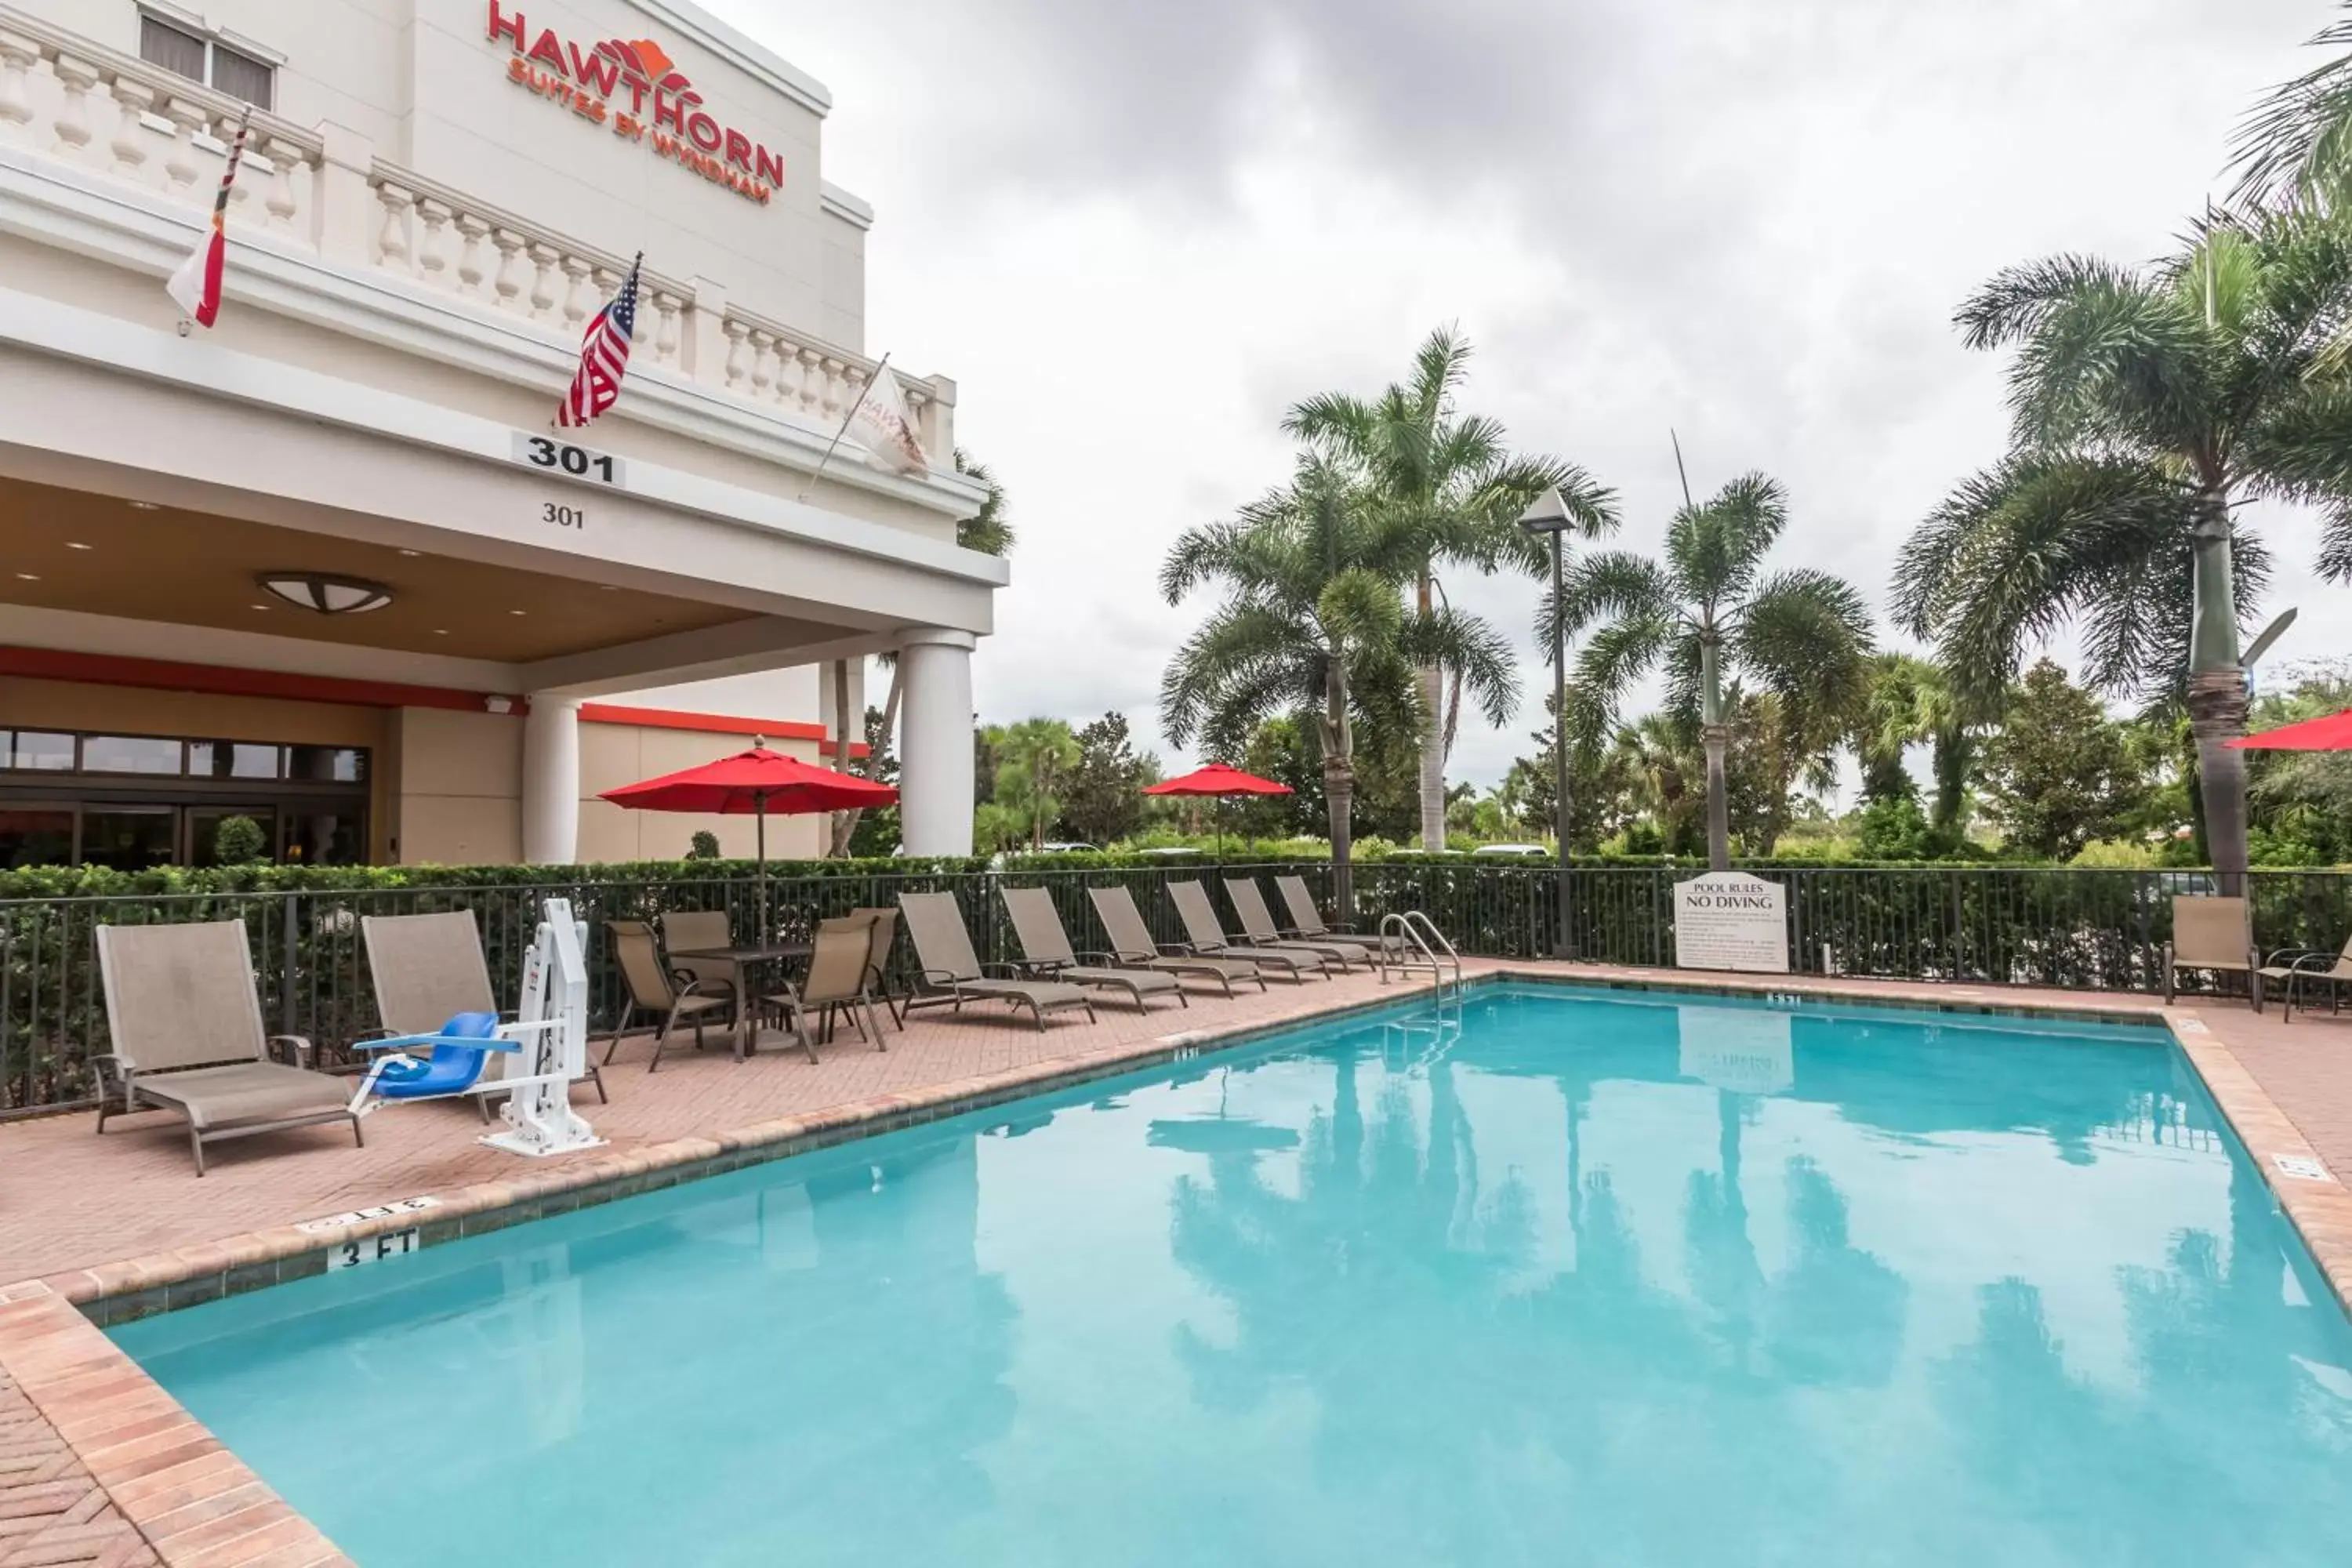 Swimming Pool in Hawthorn Suites by Wyndham West Palm Beach